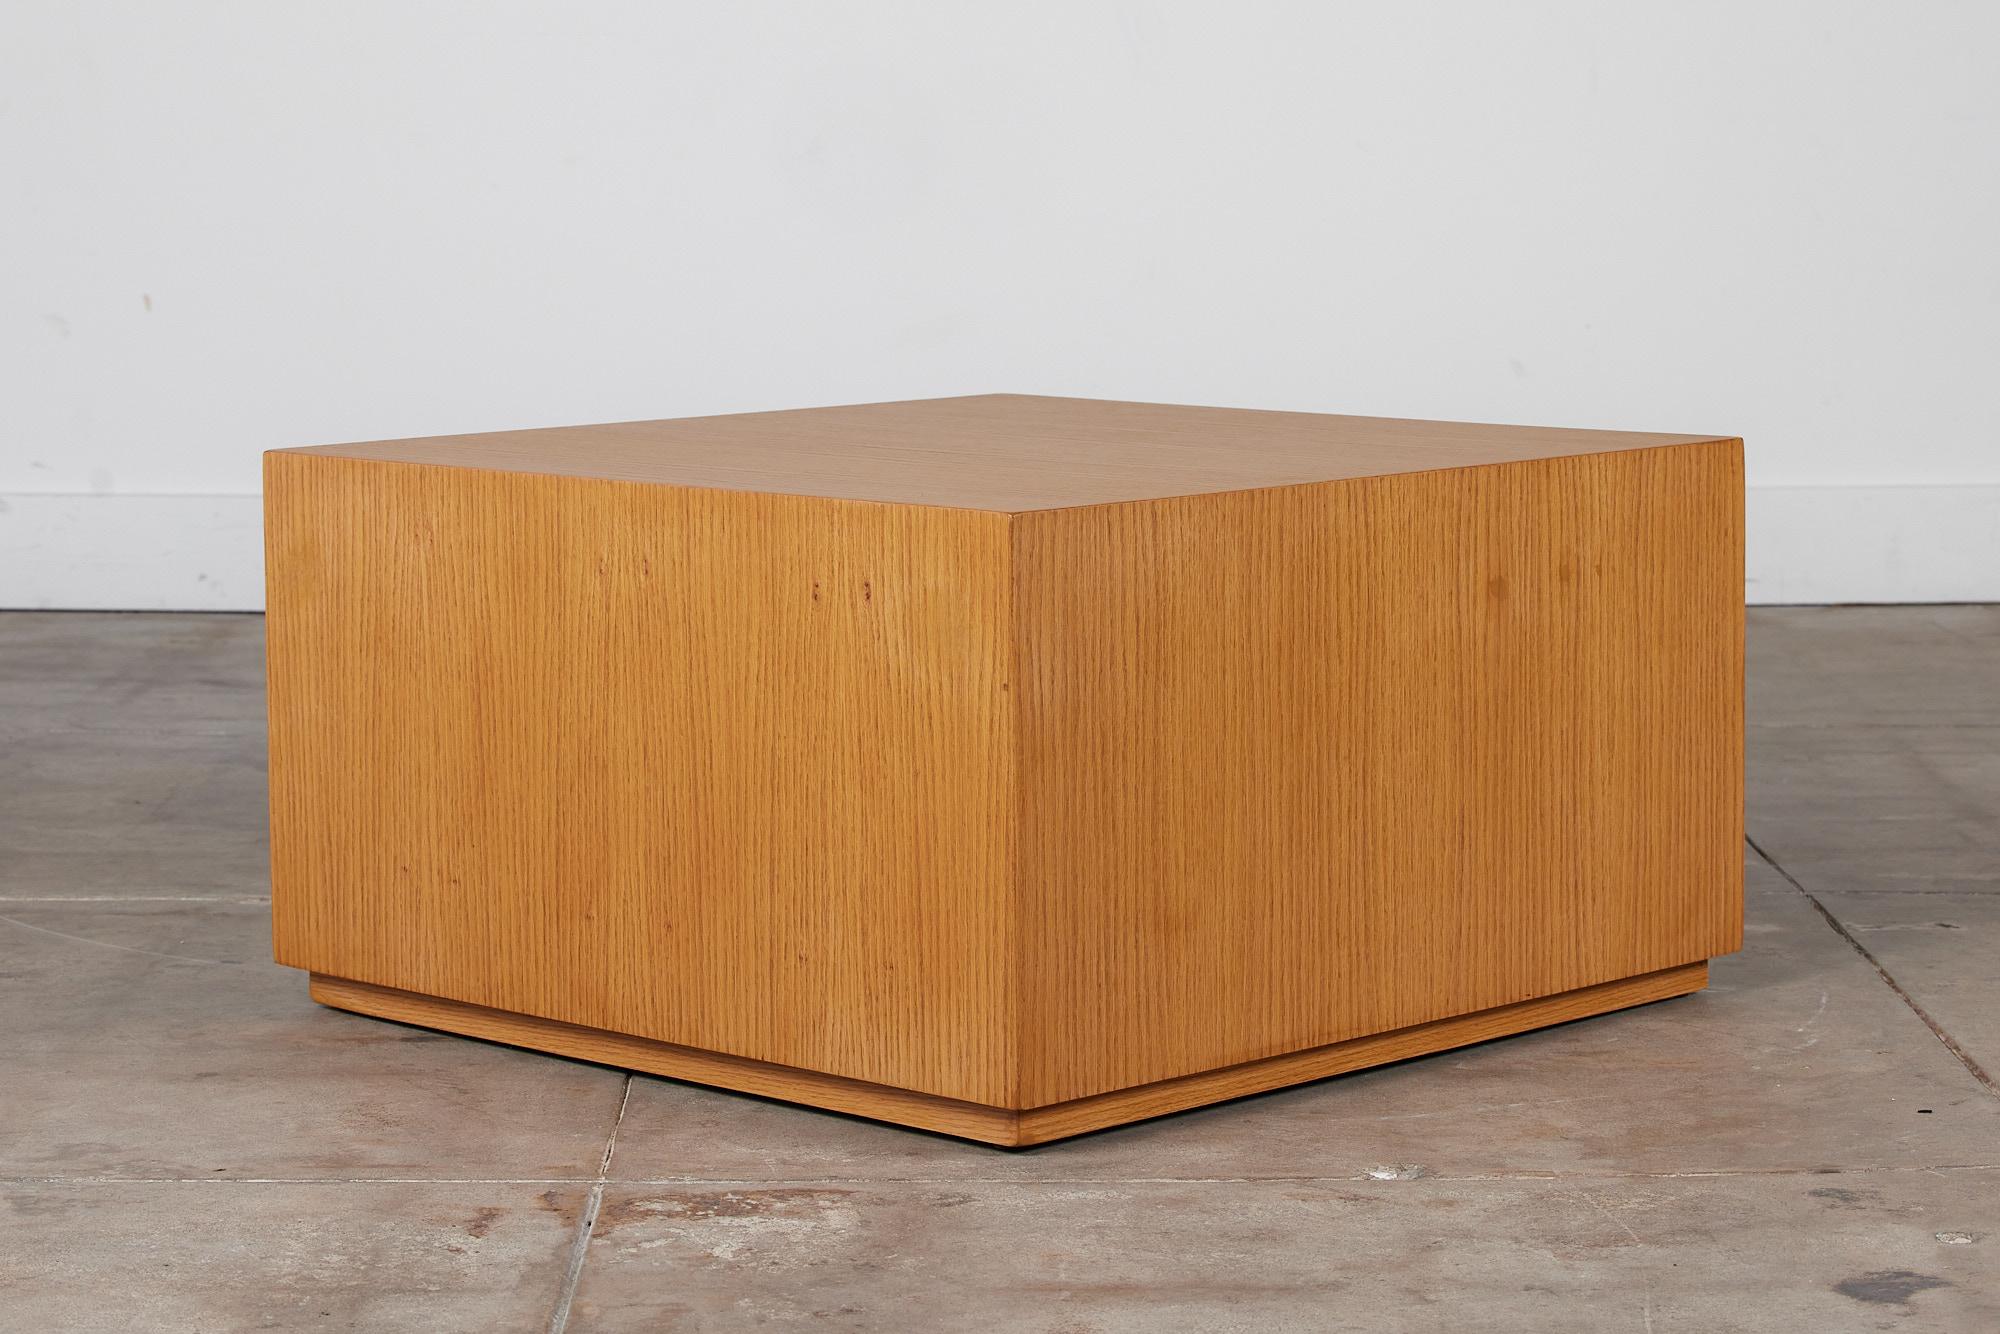 Minimalist Oak Cube Table Pedestal In Excellent Condition For Sale In Los Angeles, CA